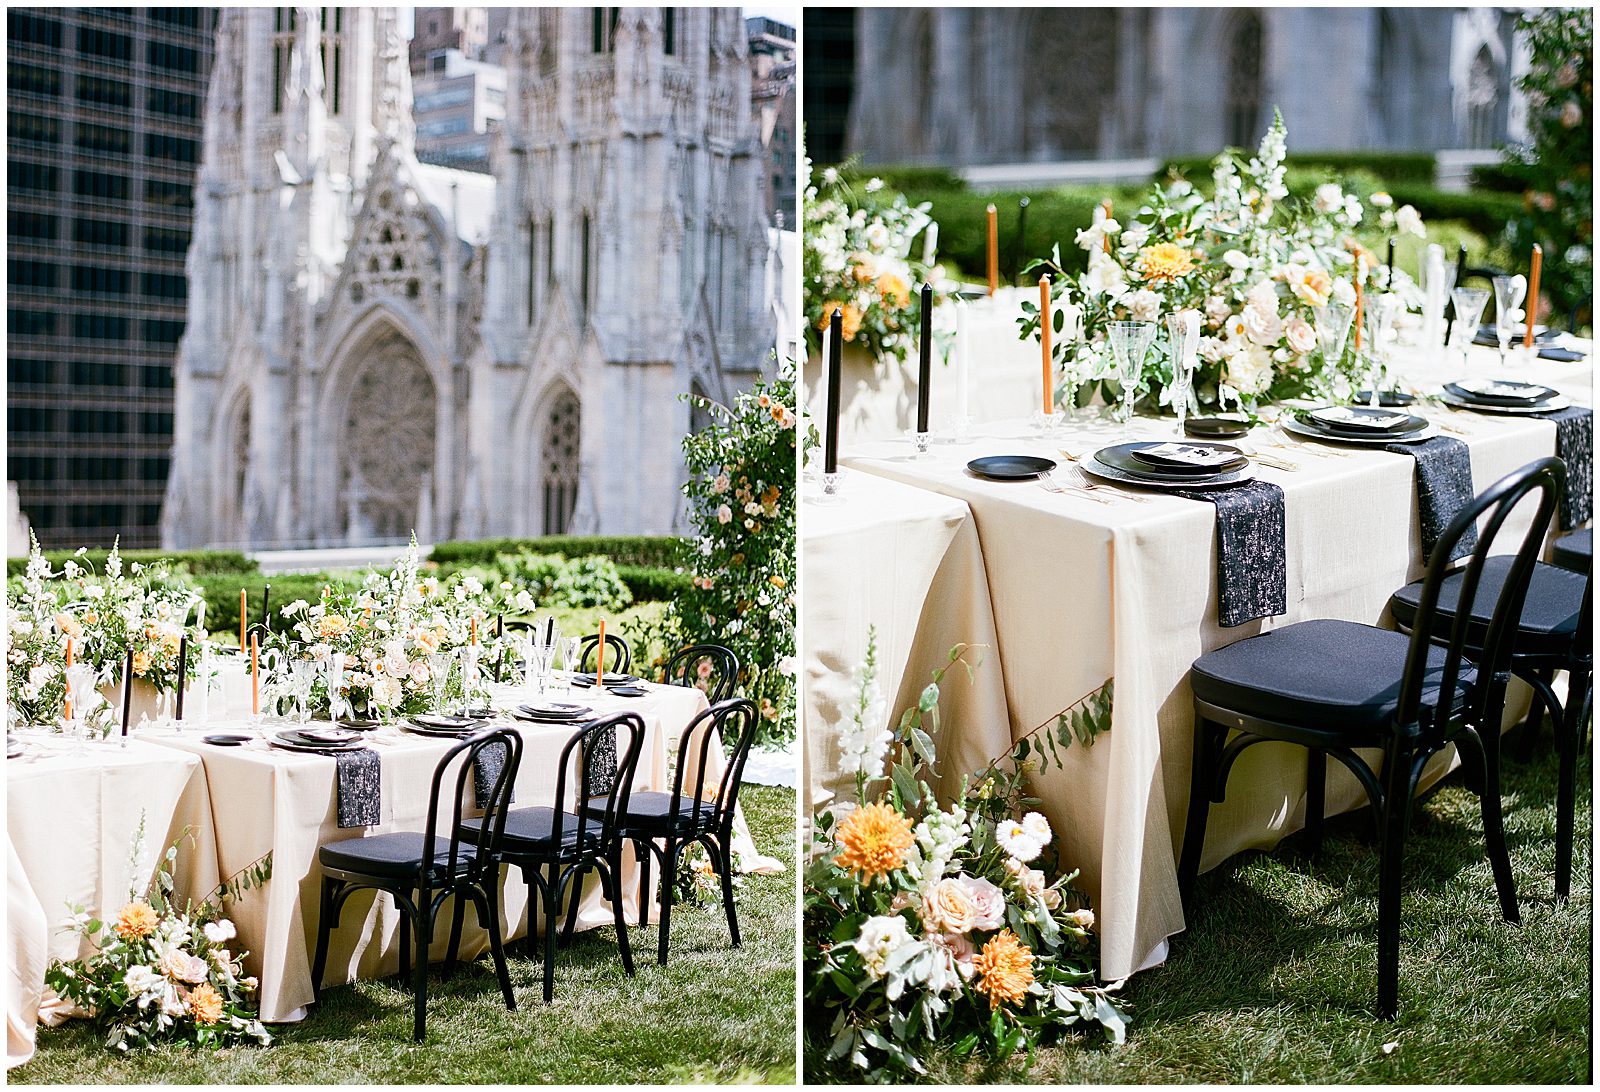 New York City Wedding Venue 620 Loft and Gardens Wedding Reception Table with St.Patricks Cathedral in Background Photos